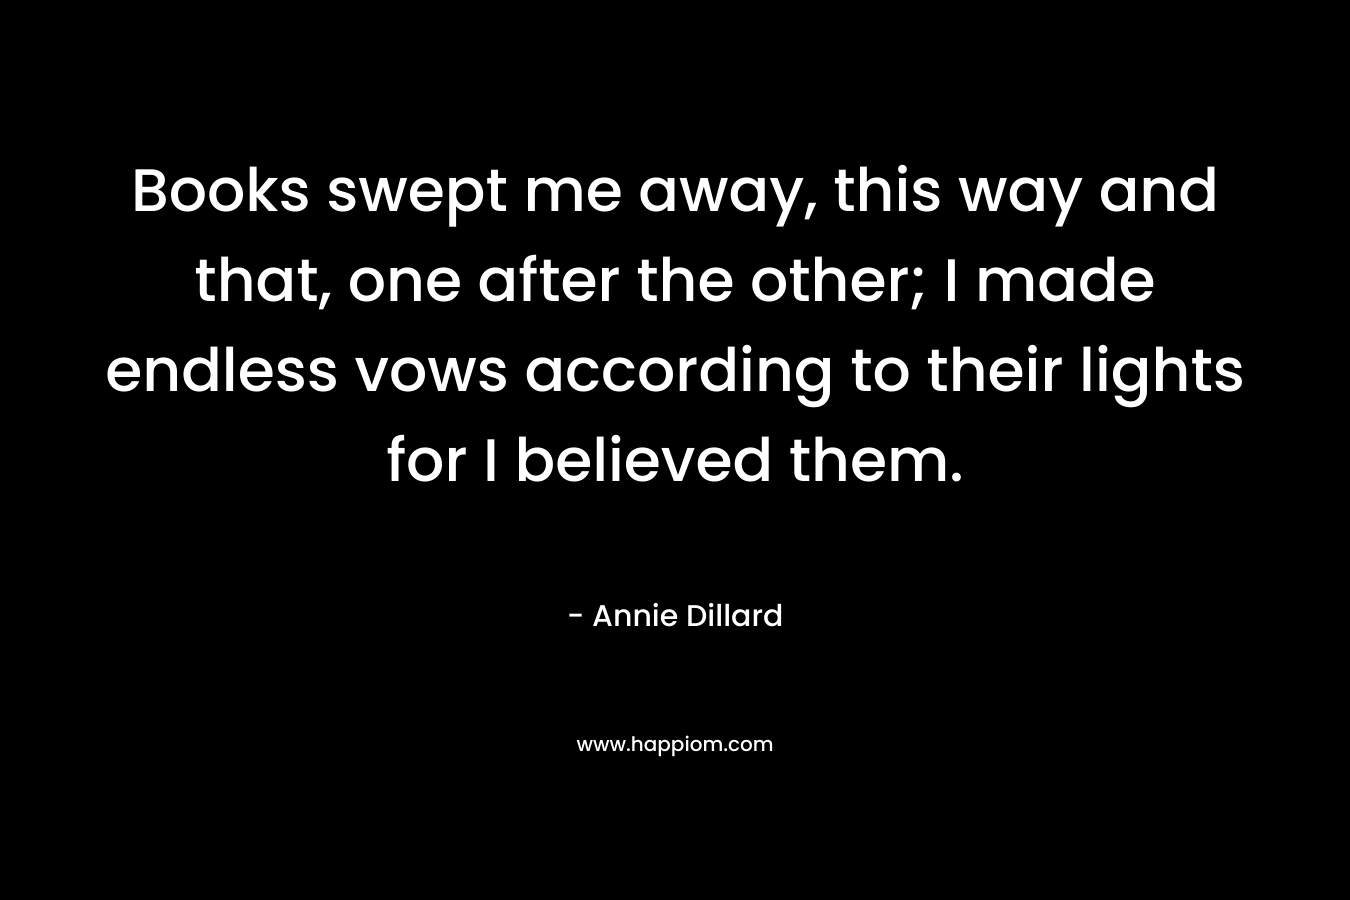 Books swept me away, this way and that, one after the other; I made endless vows according to their lights for I believed them. – Annie Dillard